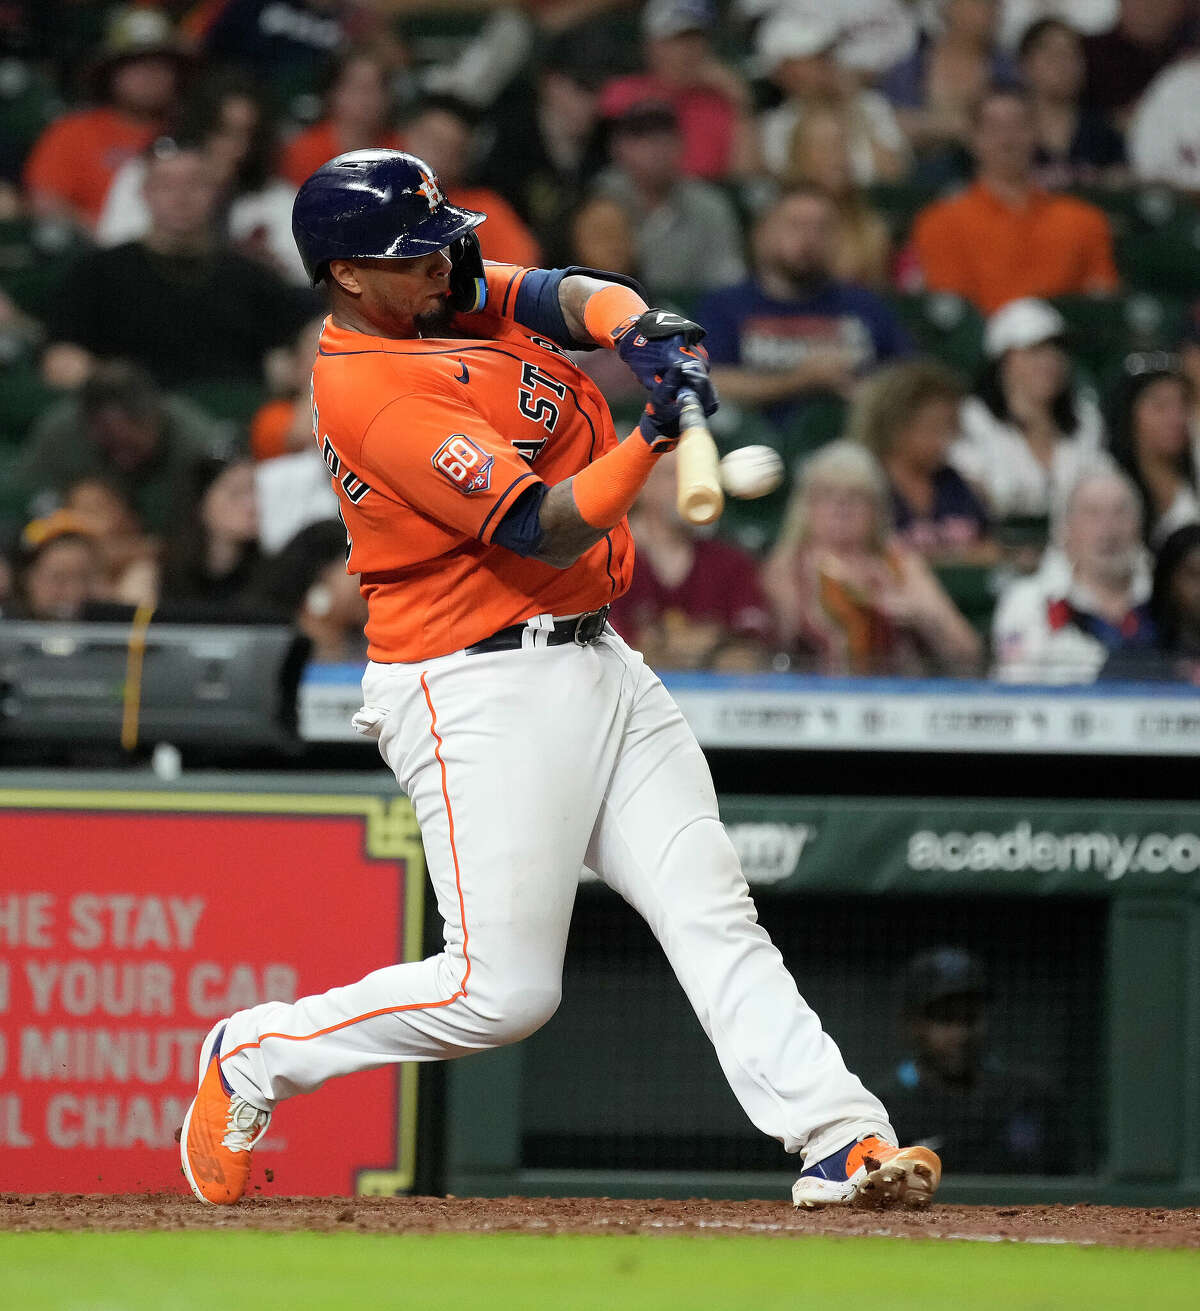 Jazz Chisholm Jr.'s 15th home run seals Marlins' series win over